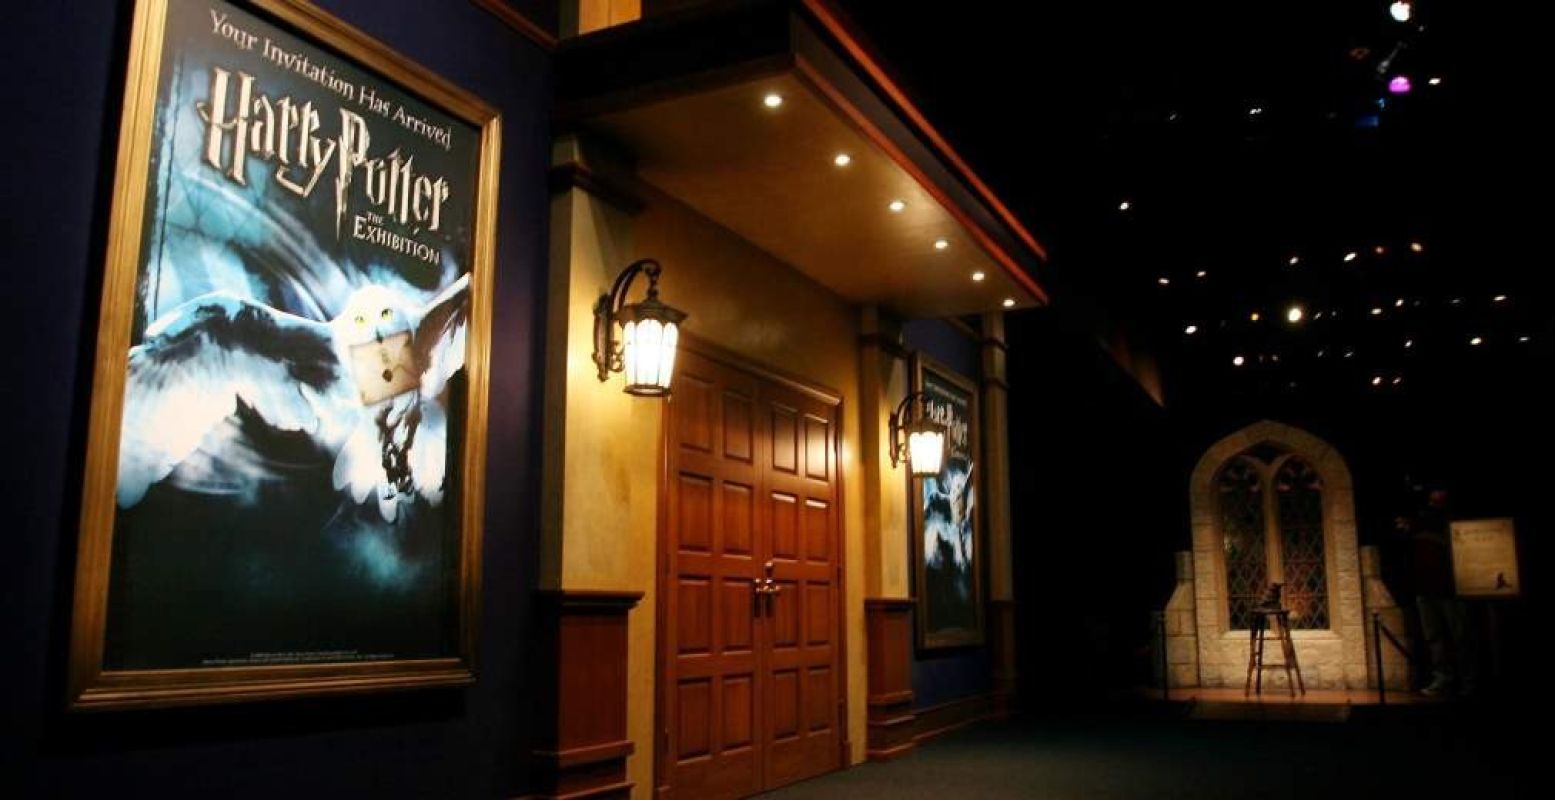 Betreed de magische wereld van Harry Potter! Foto:  Facebookpagina Harry Potter: The Exhibition . HARRY POTTER characters, names and related indicia are © & TM Warner Bros. Entertainment Inc. Harry Potter Publishing Rights © JKR. (s16)